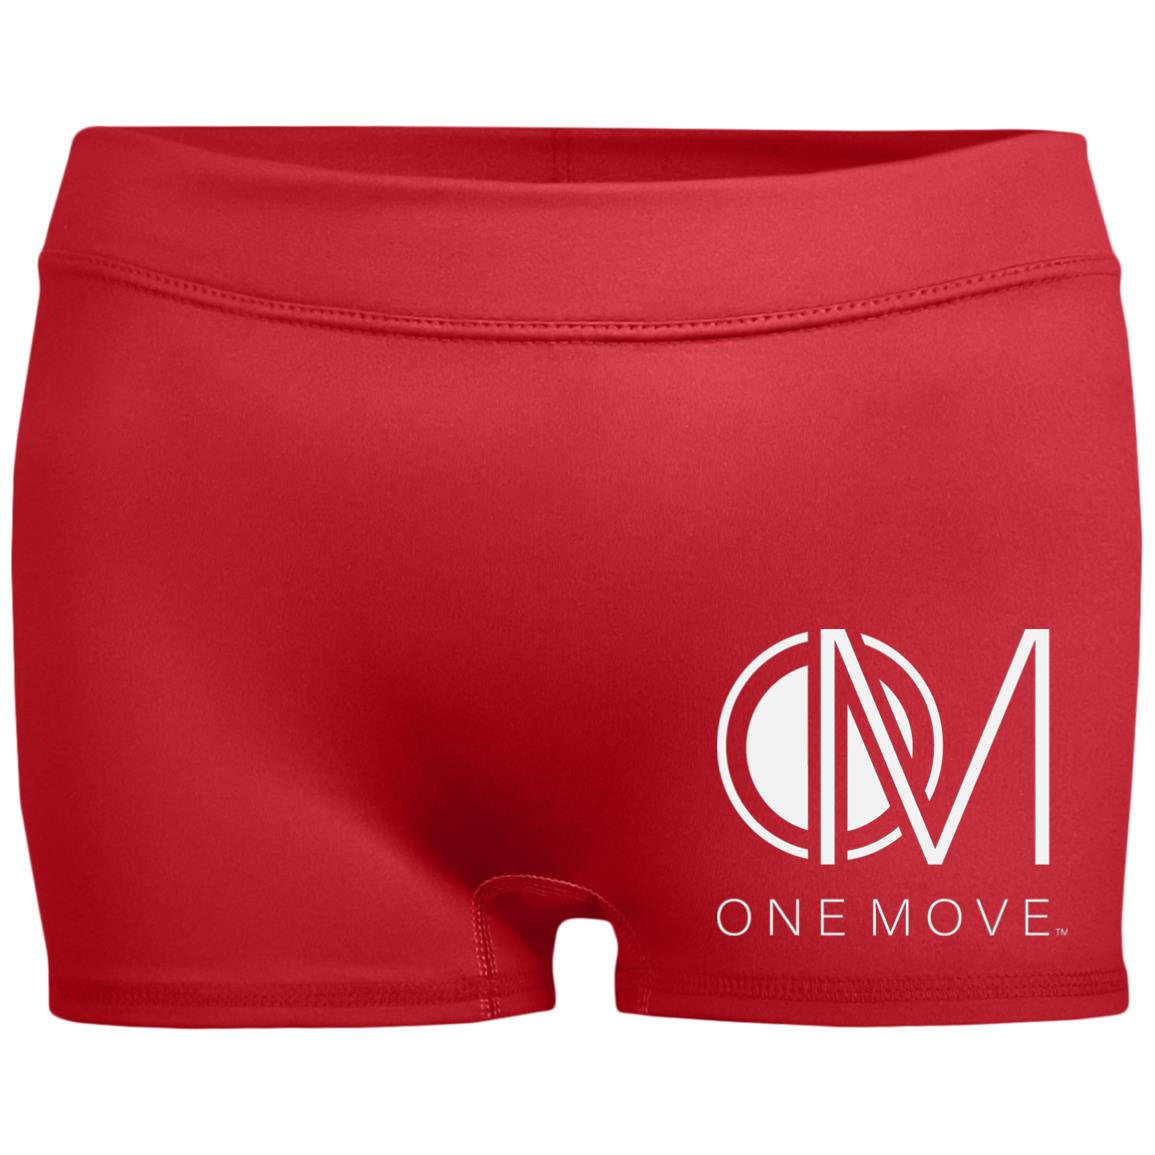 OM-wht Ladies' Fitted Moisture-Wicking 2.5 inch Inseam Shorts